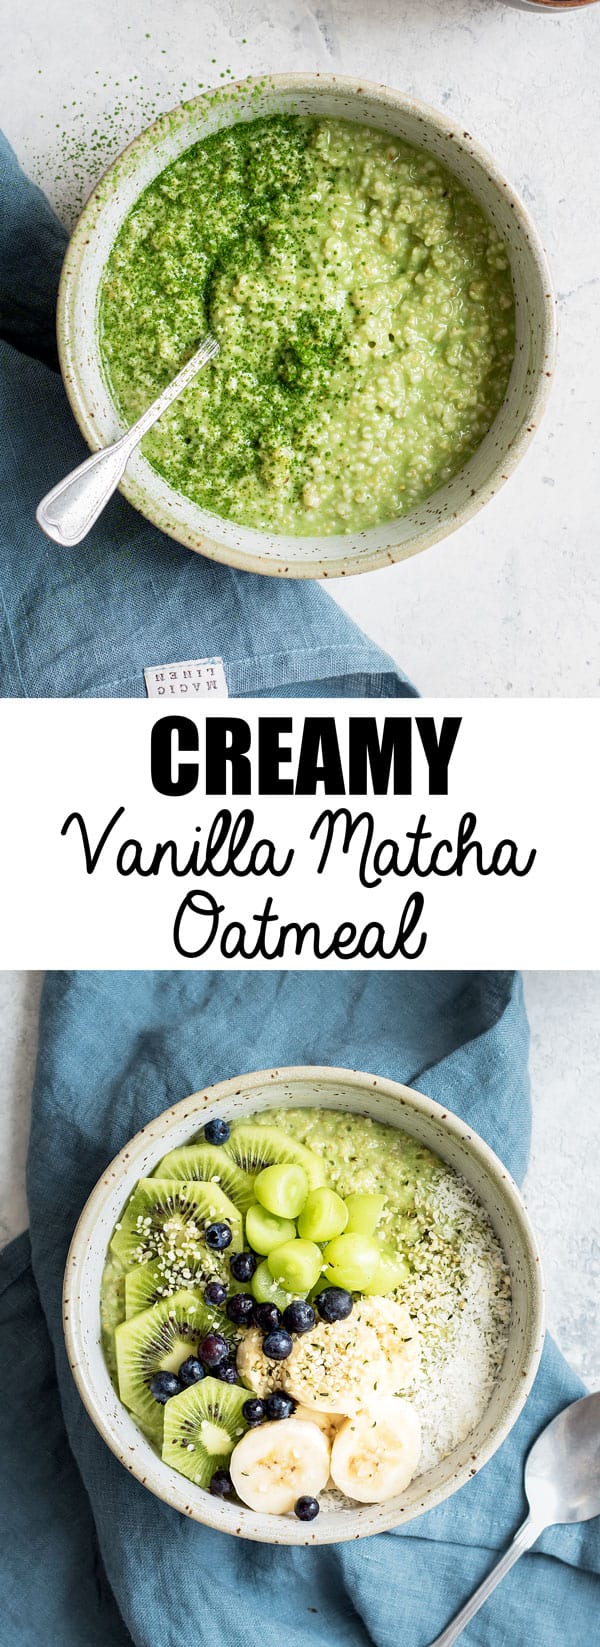 This creamy vanilla matcha oatmeal is a healthy and easy breakfast recipe made with steel-cut oats!